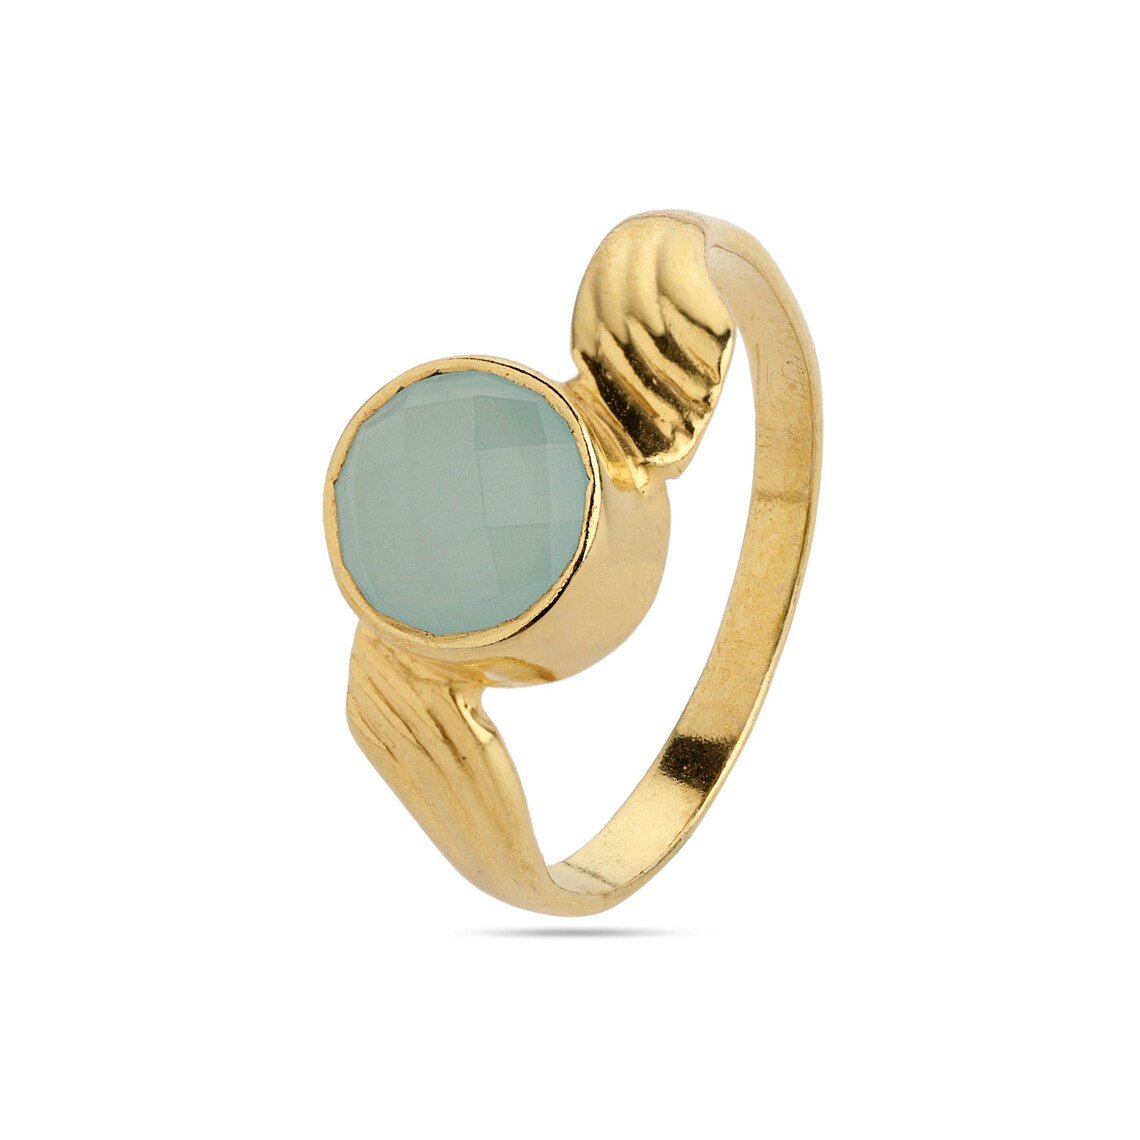 Everyday Ring - Blue Chalcedony Round Stone - 925 Sterling Silver Ring with Gold Plating